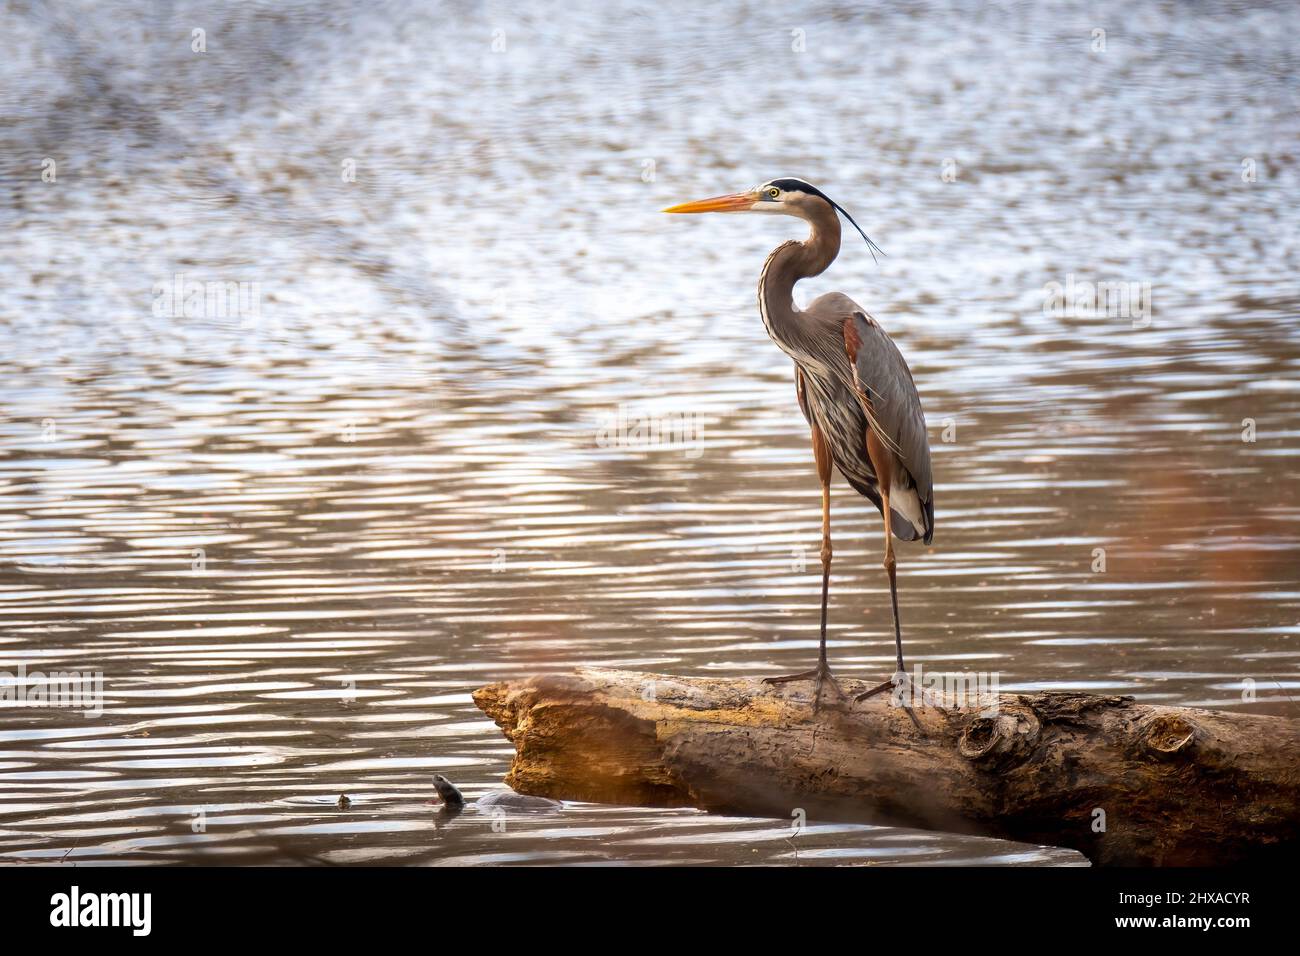 Picturesque view of a Great Blue Heron scanninging the pond. Raleigh, North Carolina. Stock Photo